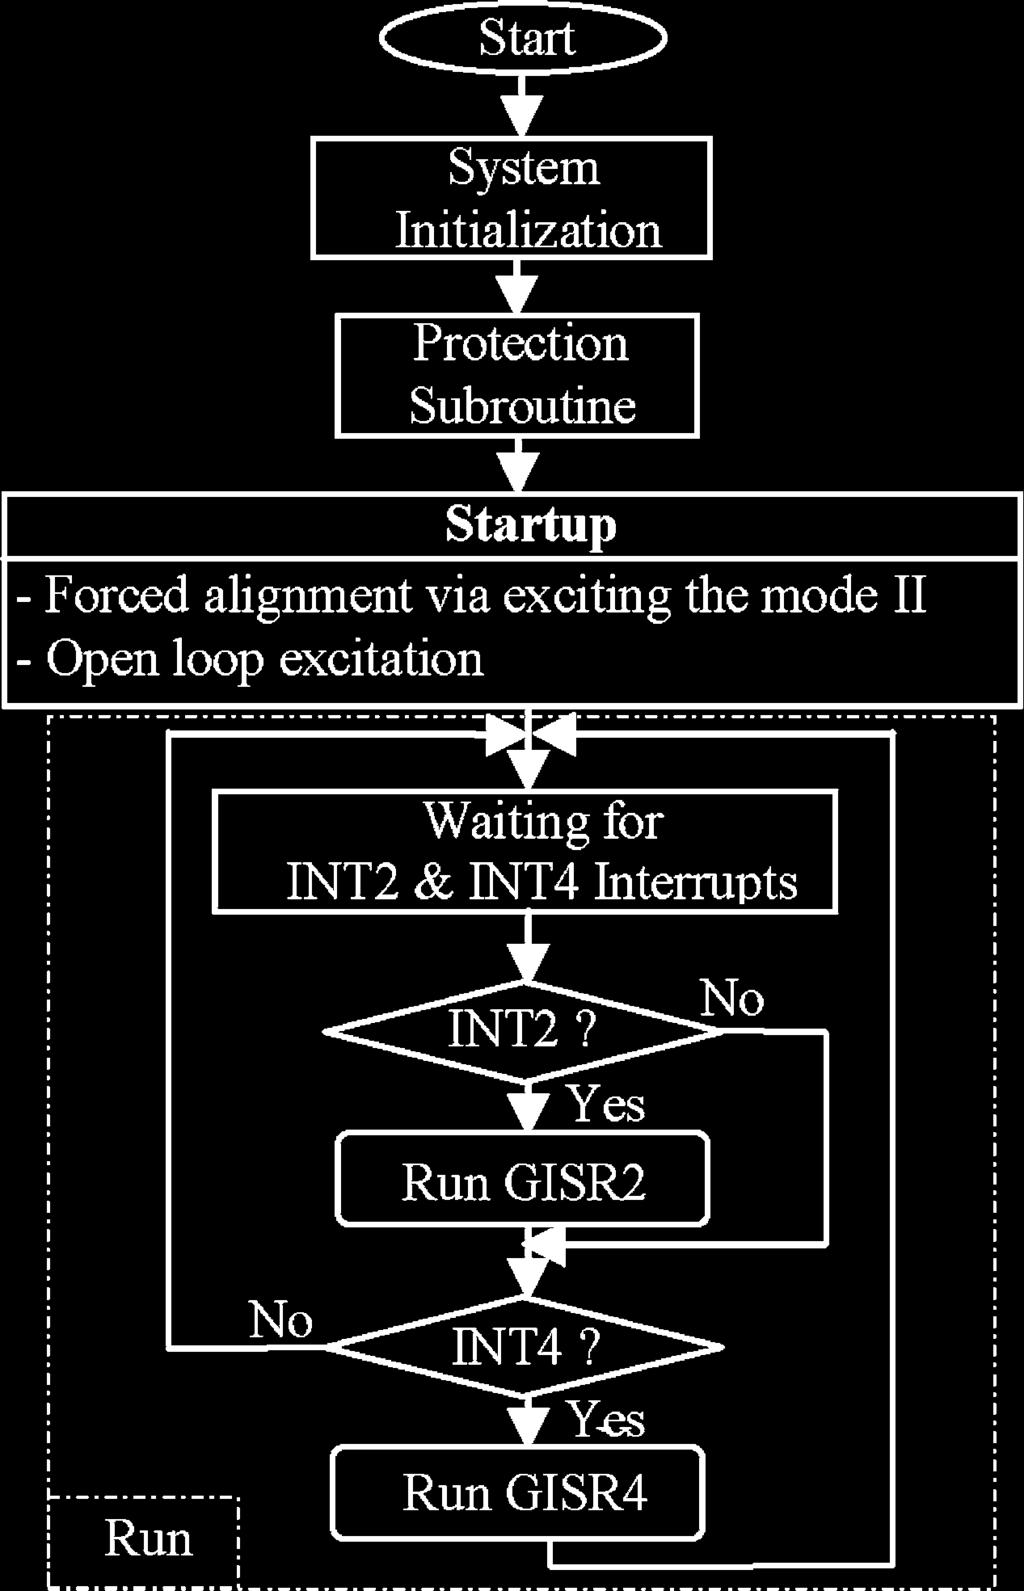 Main control flowchart of the system software.